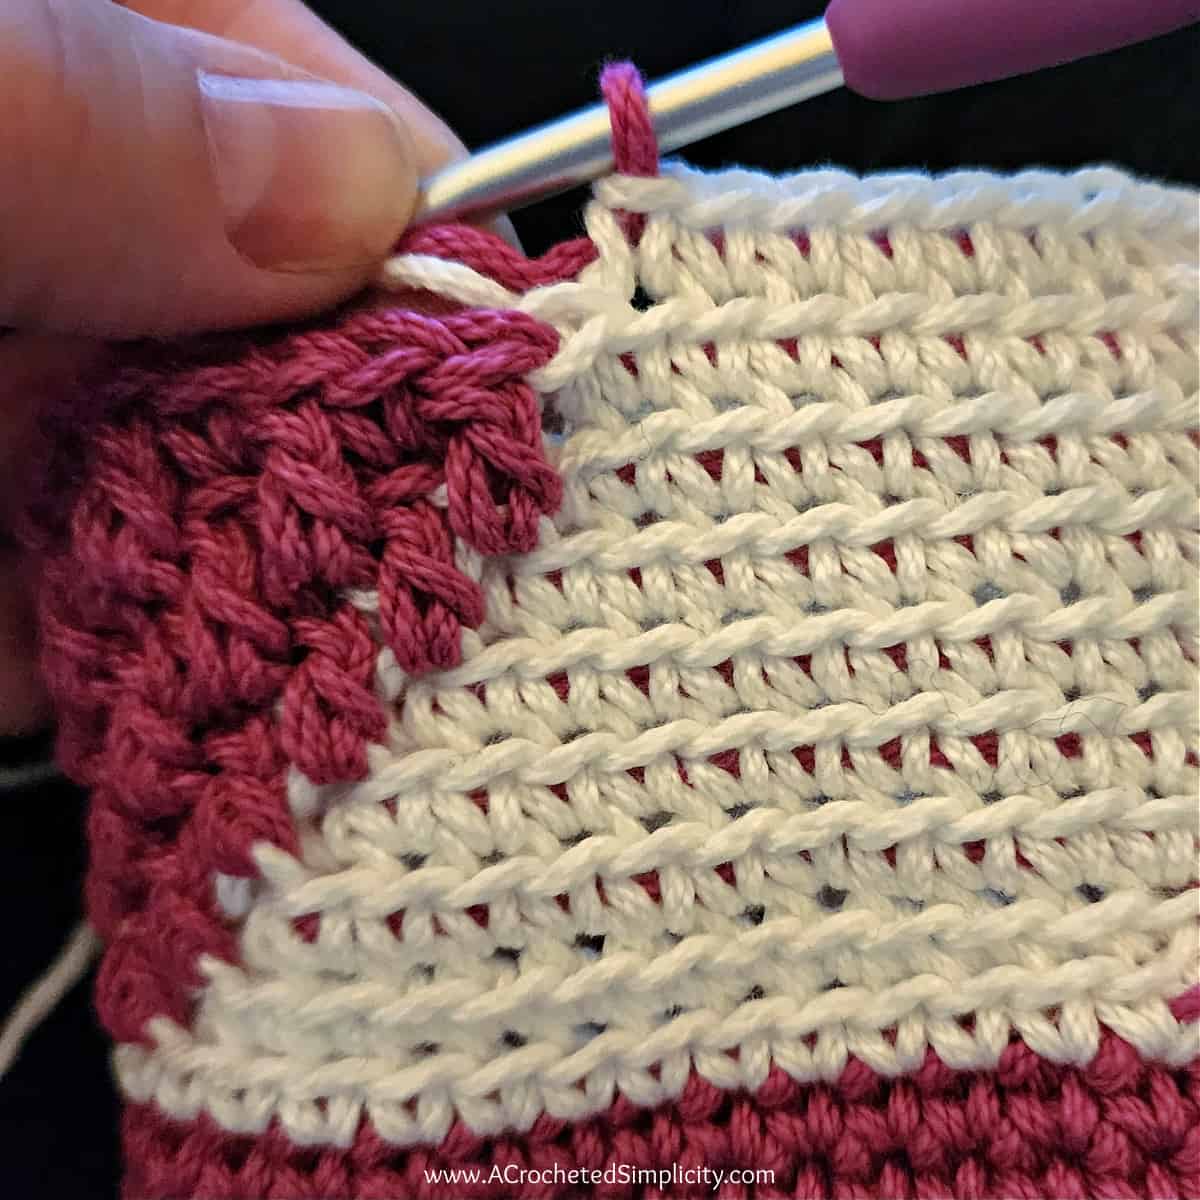 Close up of a crochet valentines treat bag showing how to change colors from white to pink.